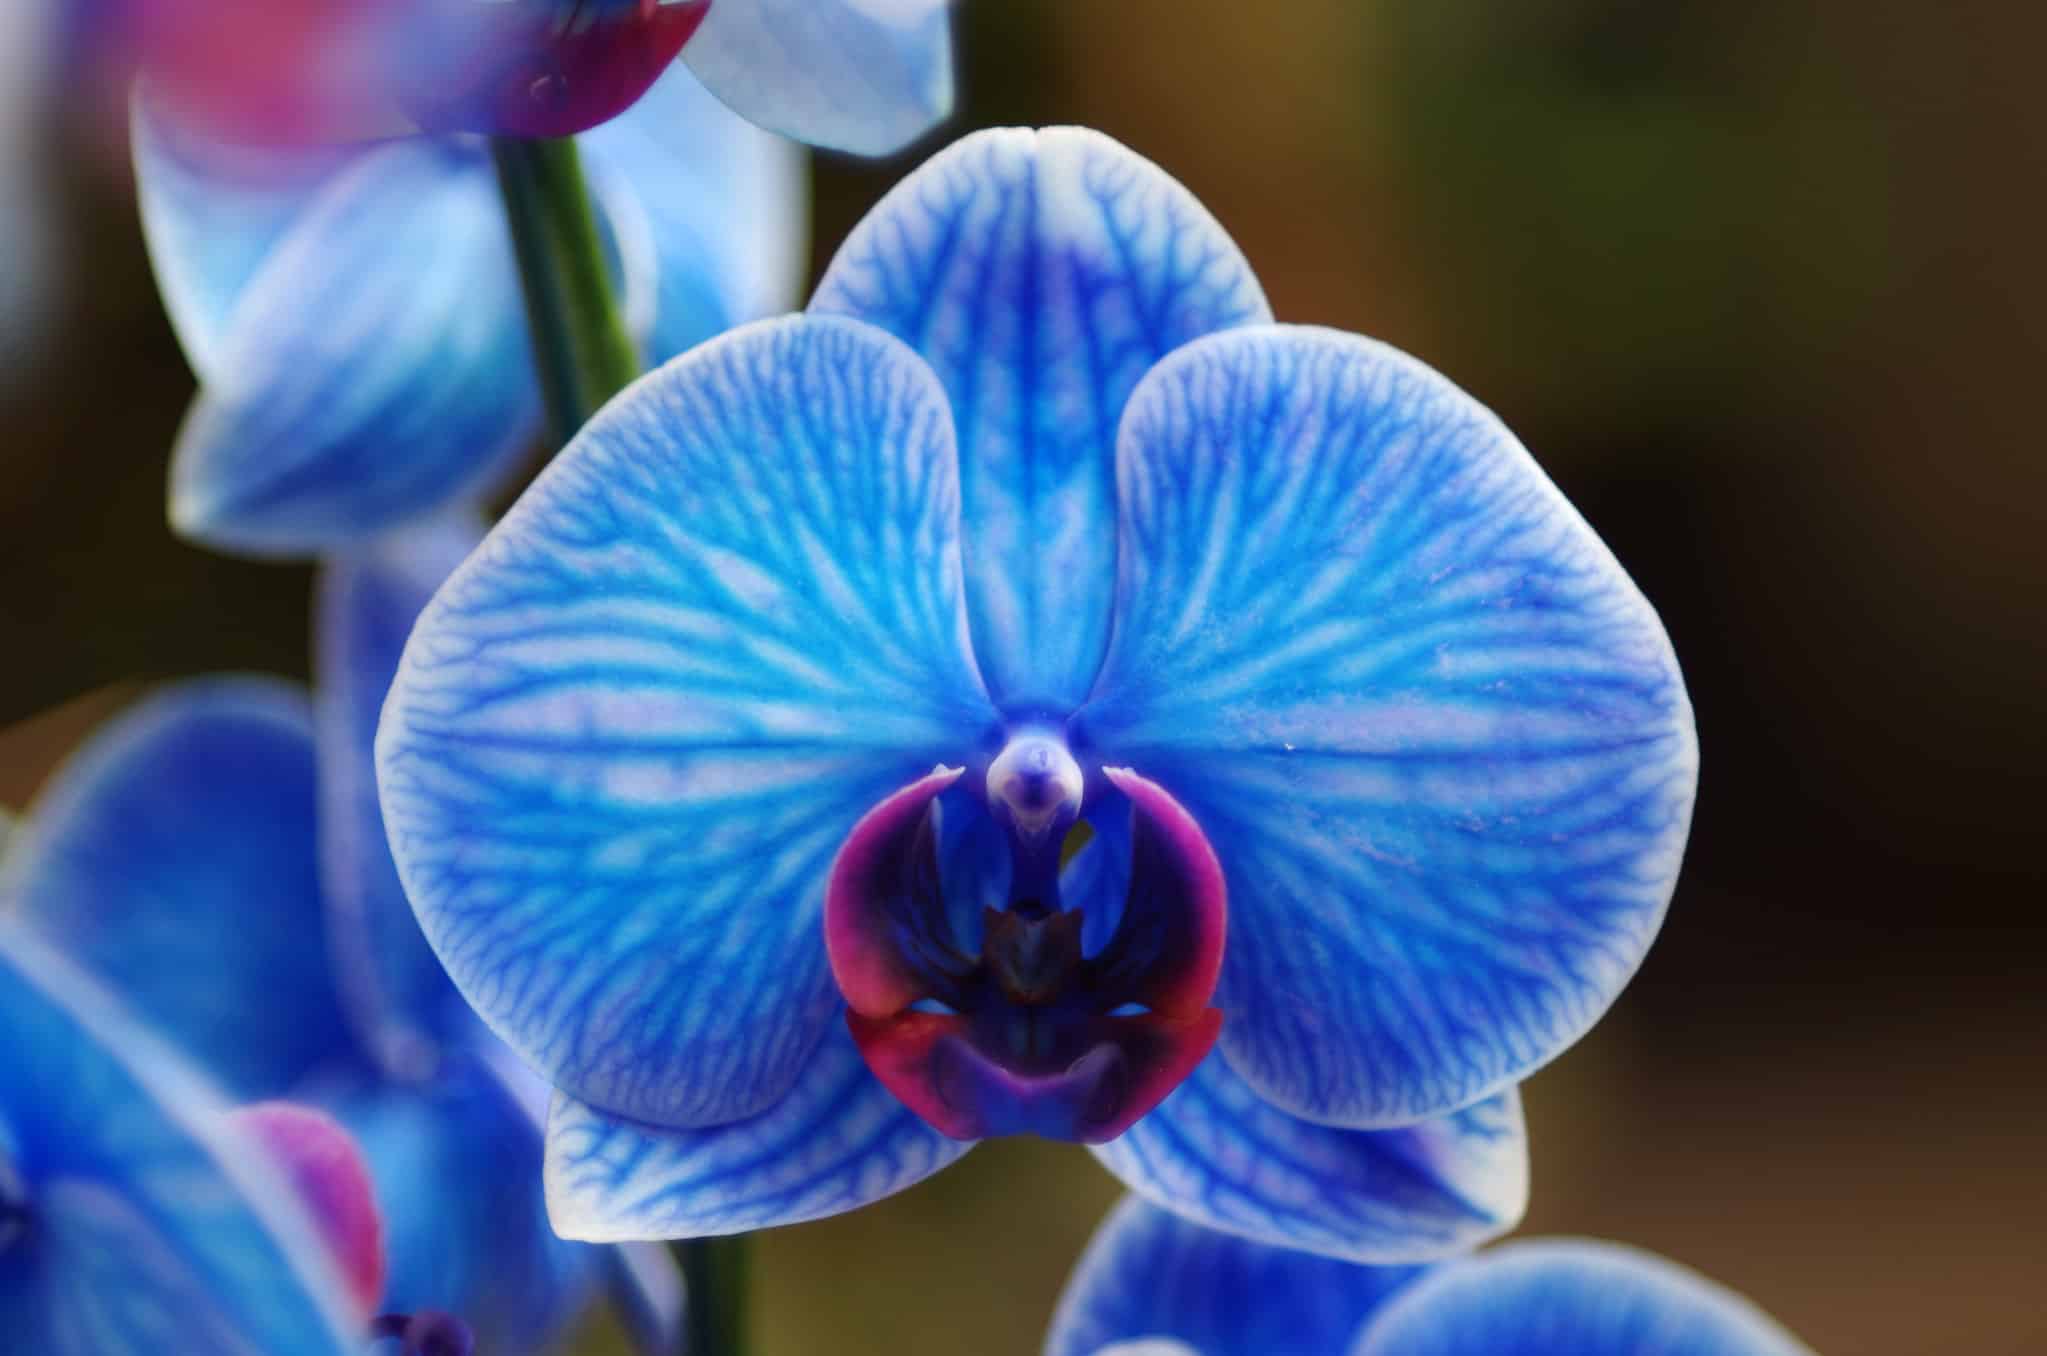 Orchids embody luxury and fragility.